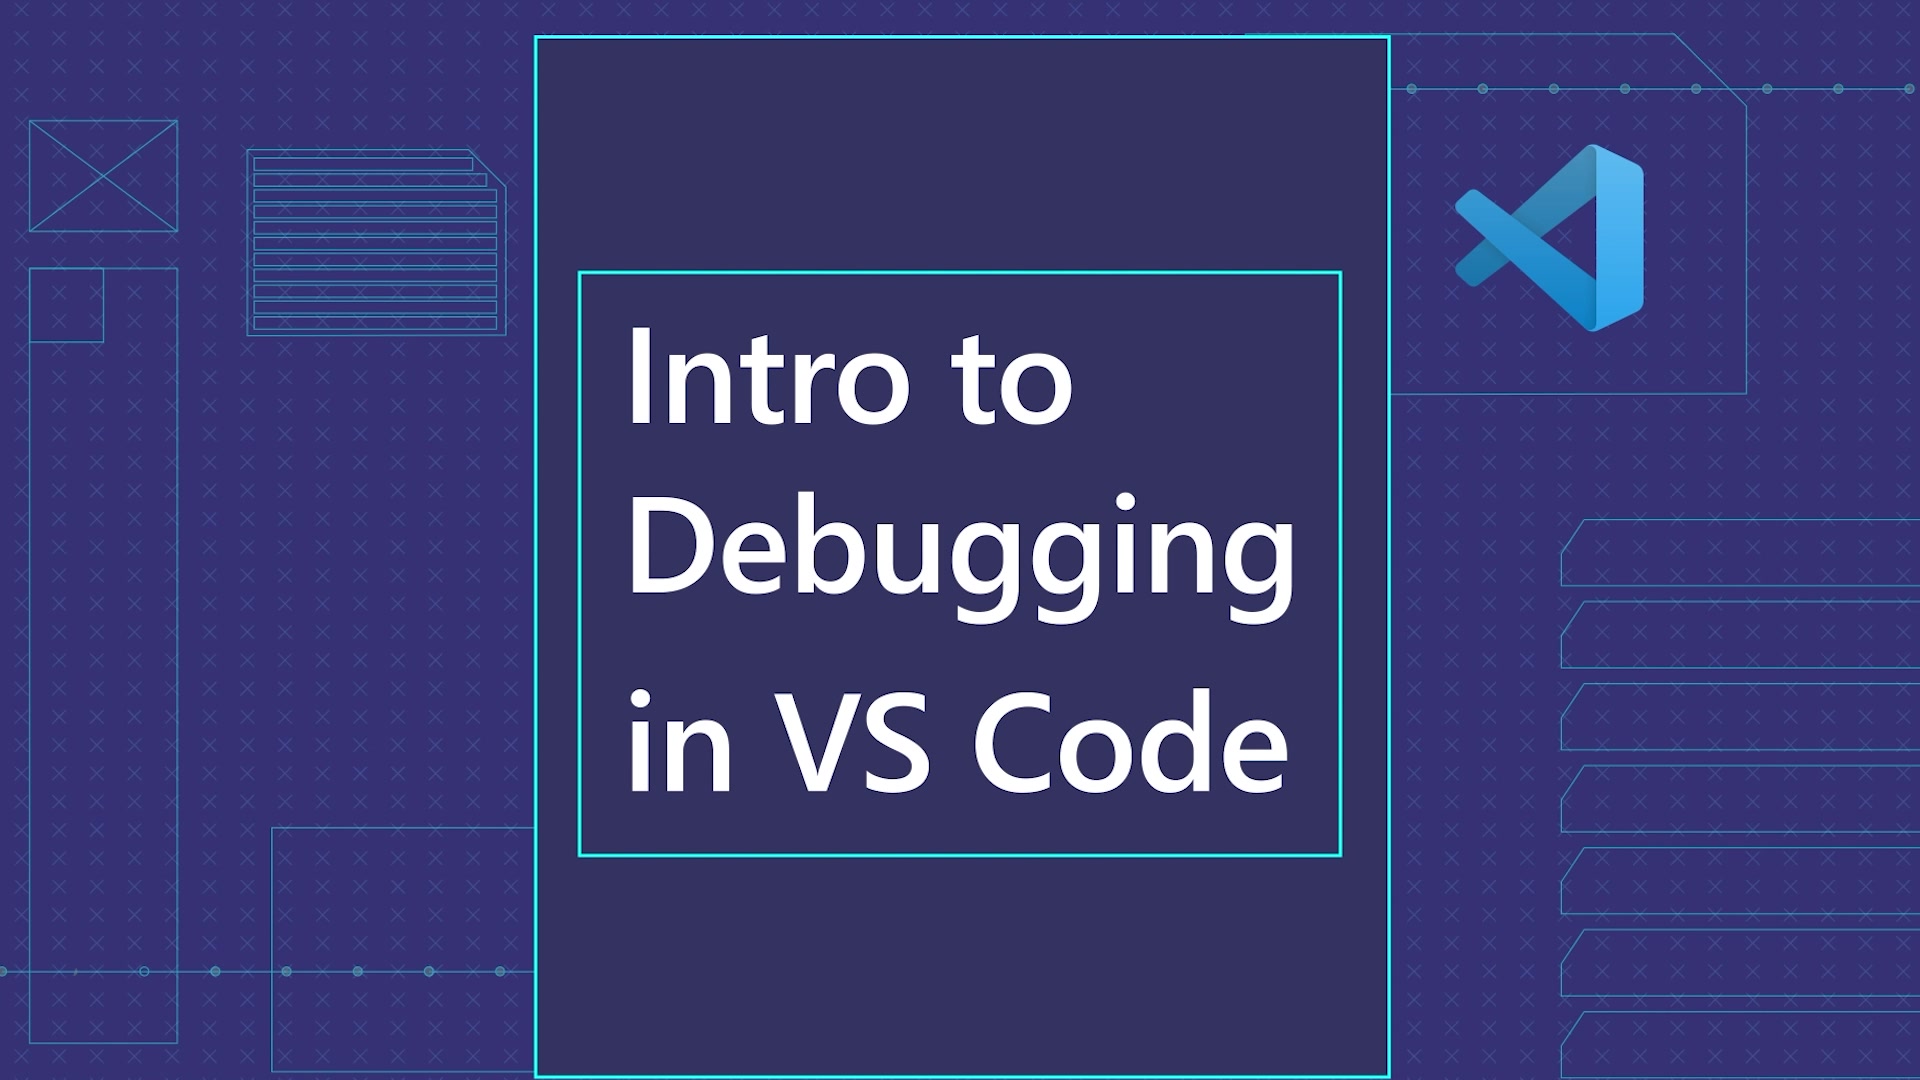 Introduction to Debugging in Visual Studio Code